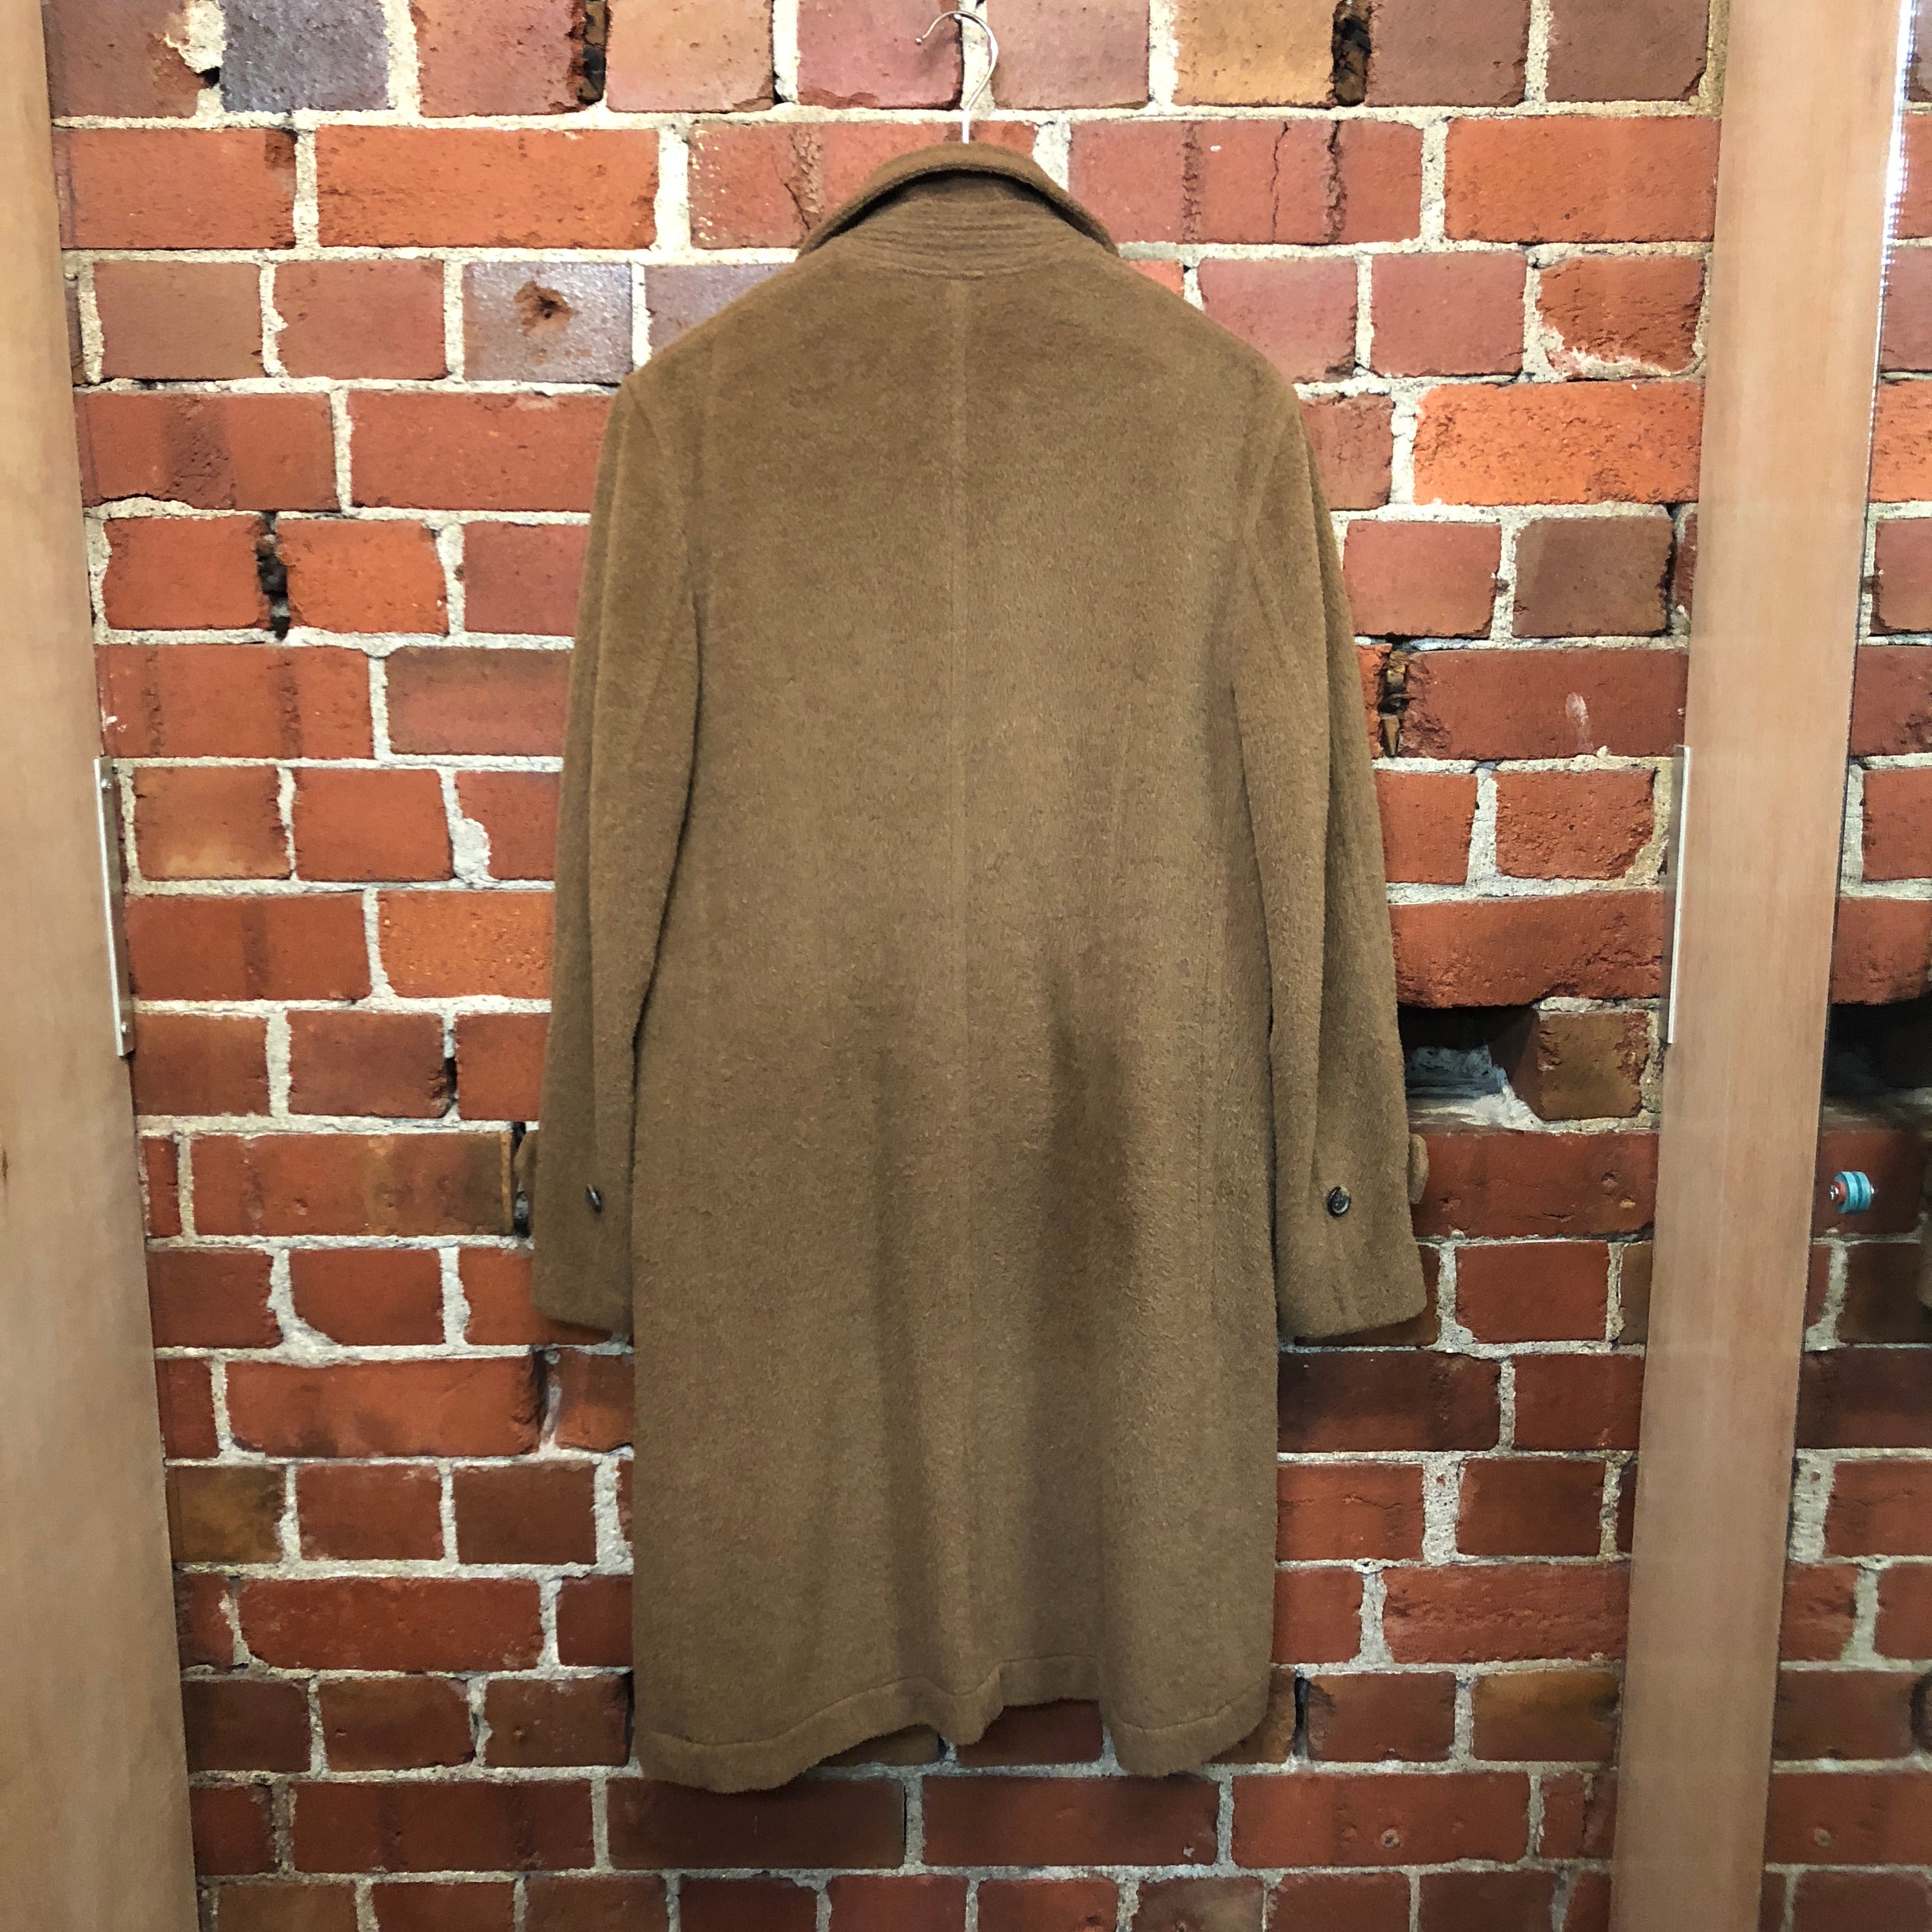 COMME des GARÇONS lambswool double breasted coat